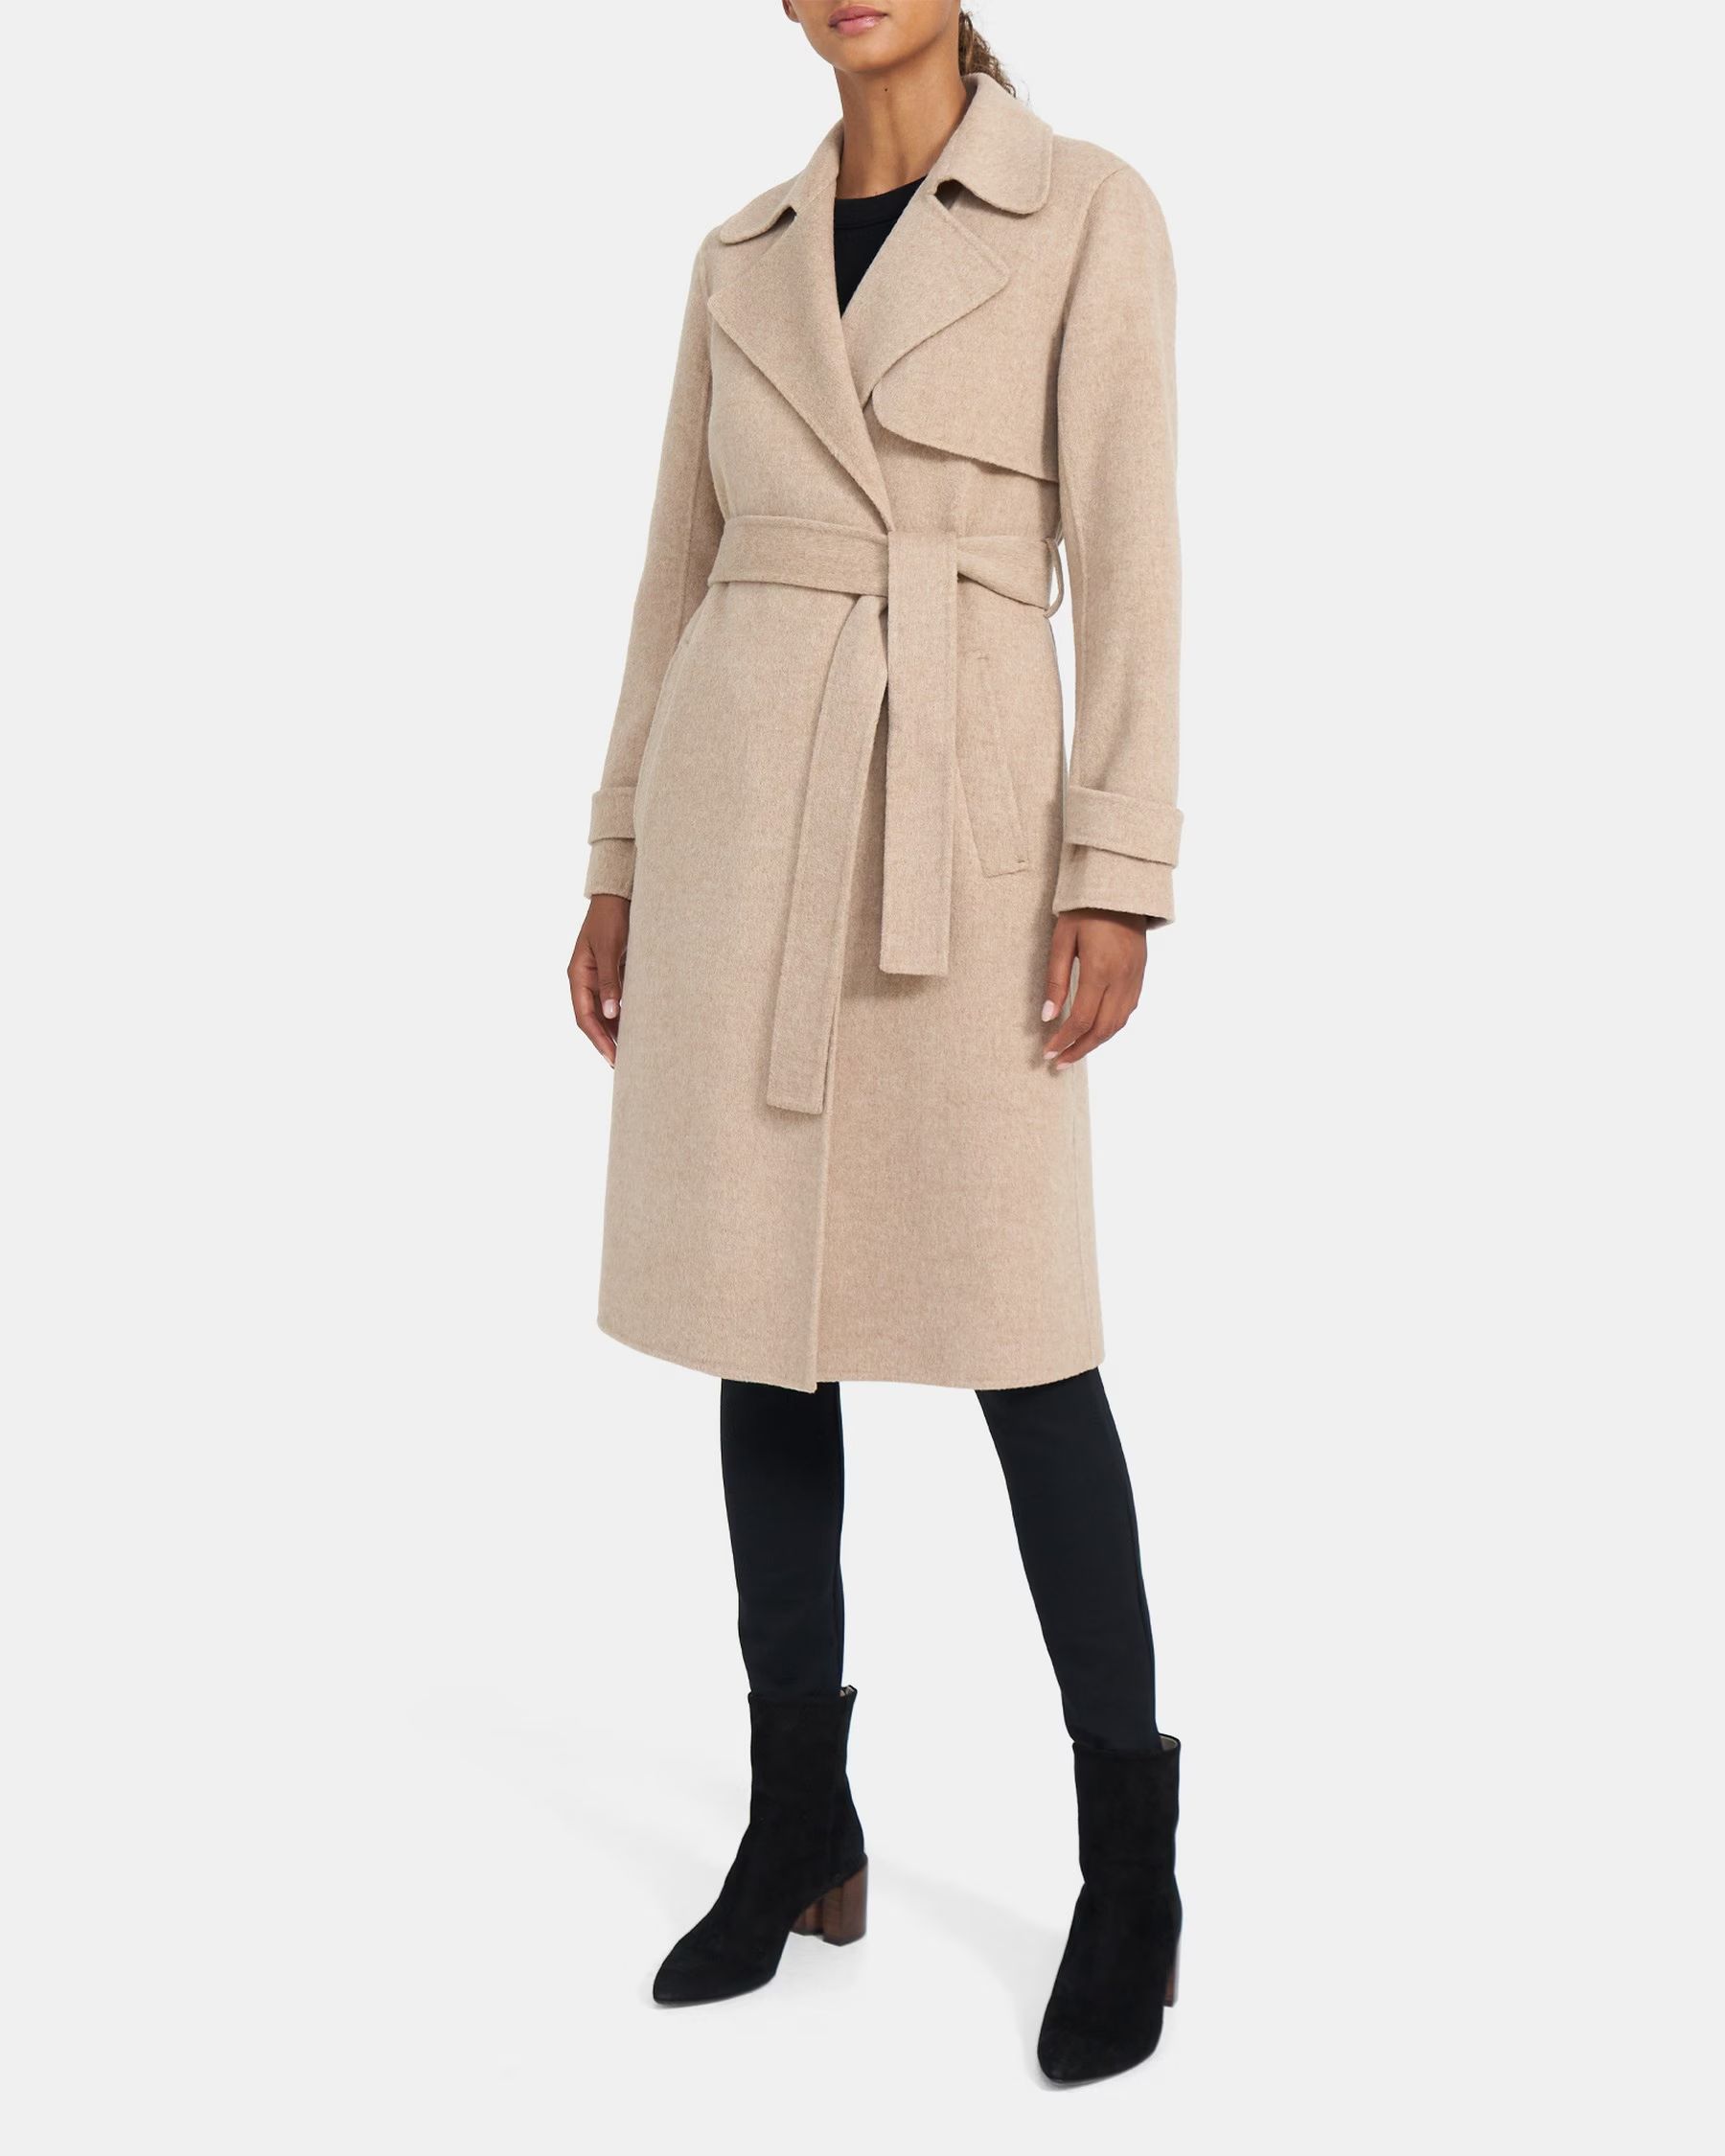 Relaxed Trench Coat in Double-Face Wool-Cashmere | Theory Outlet